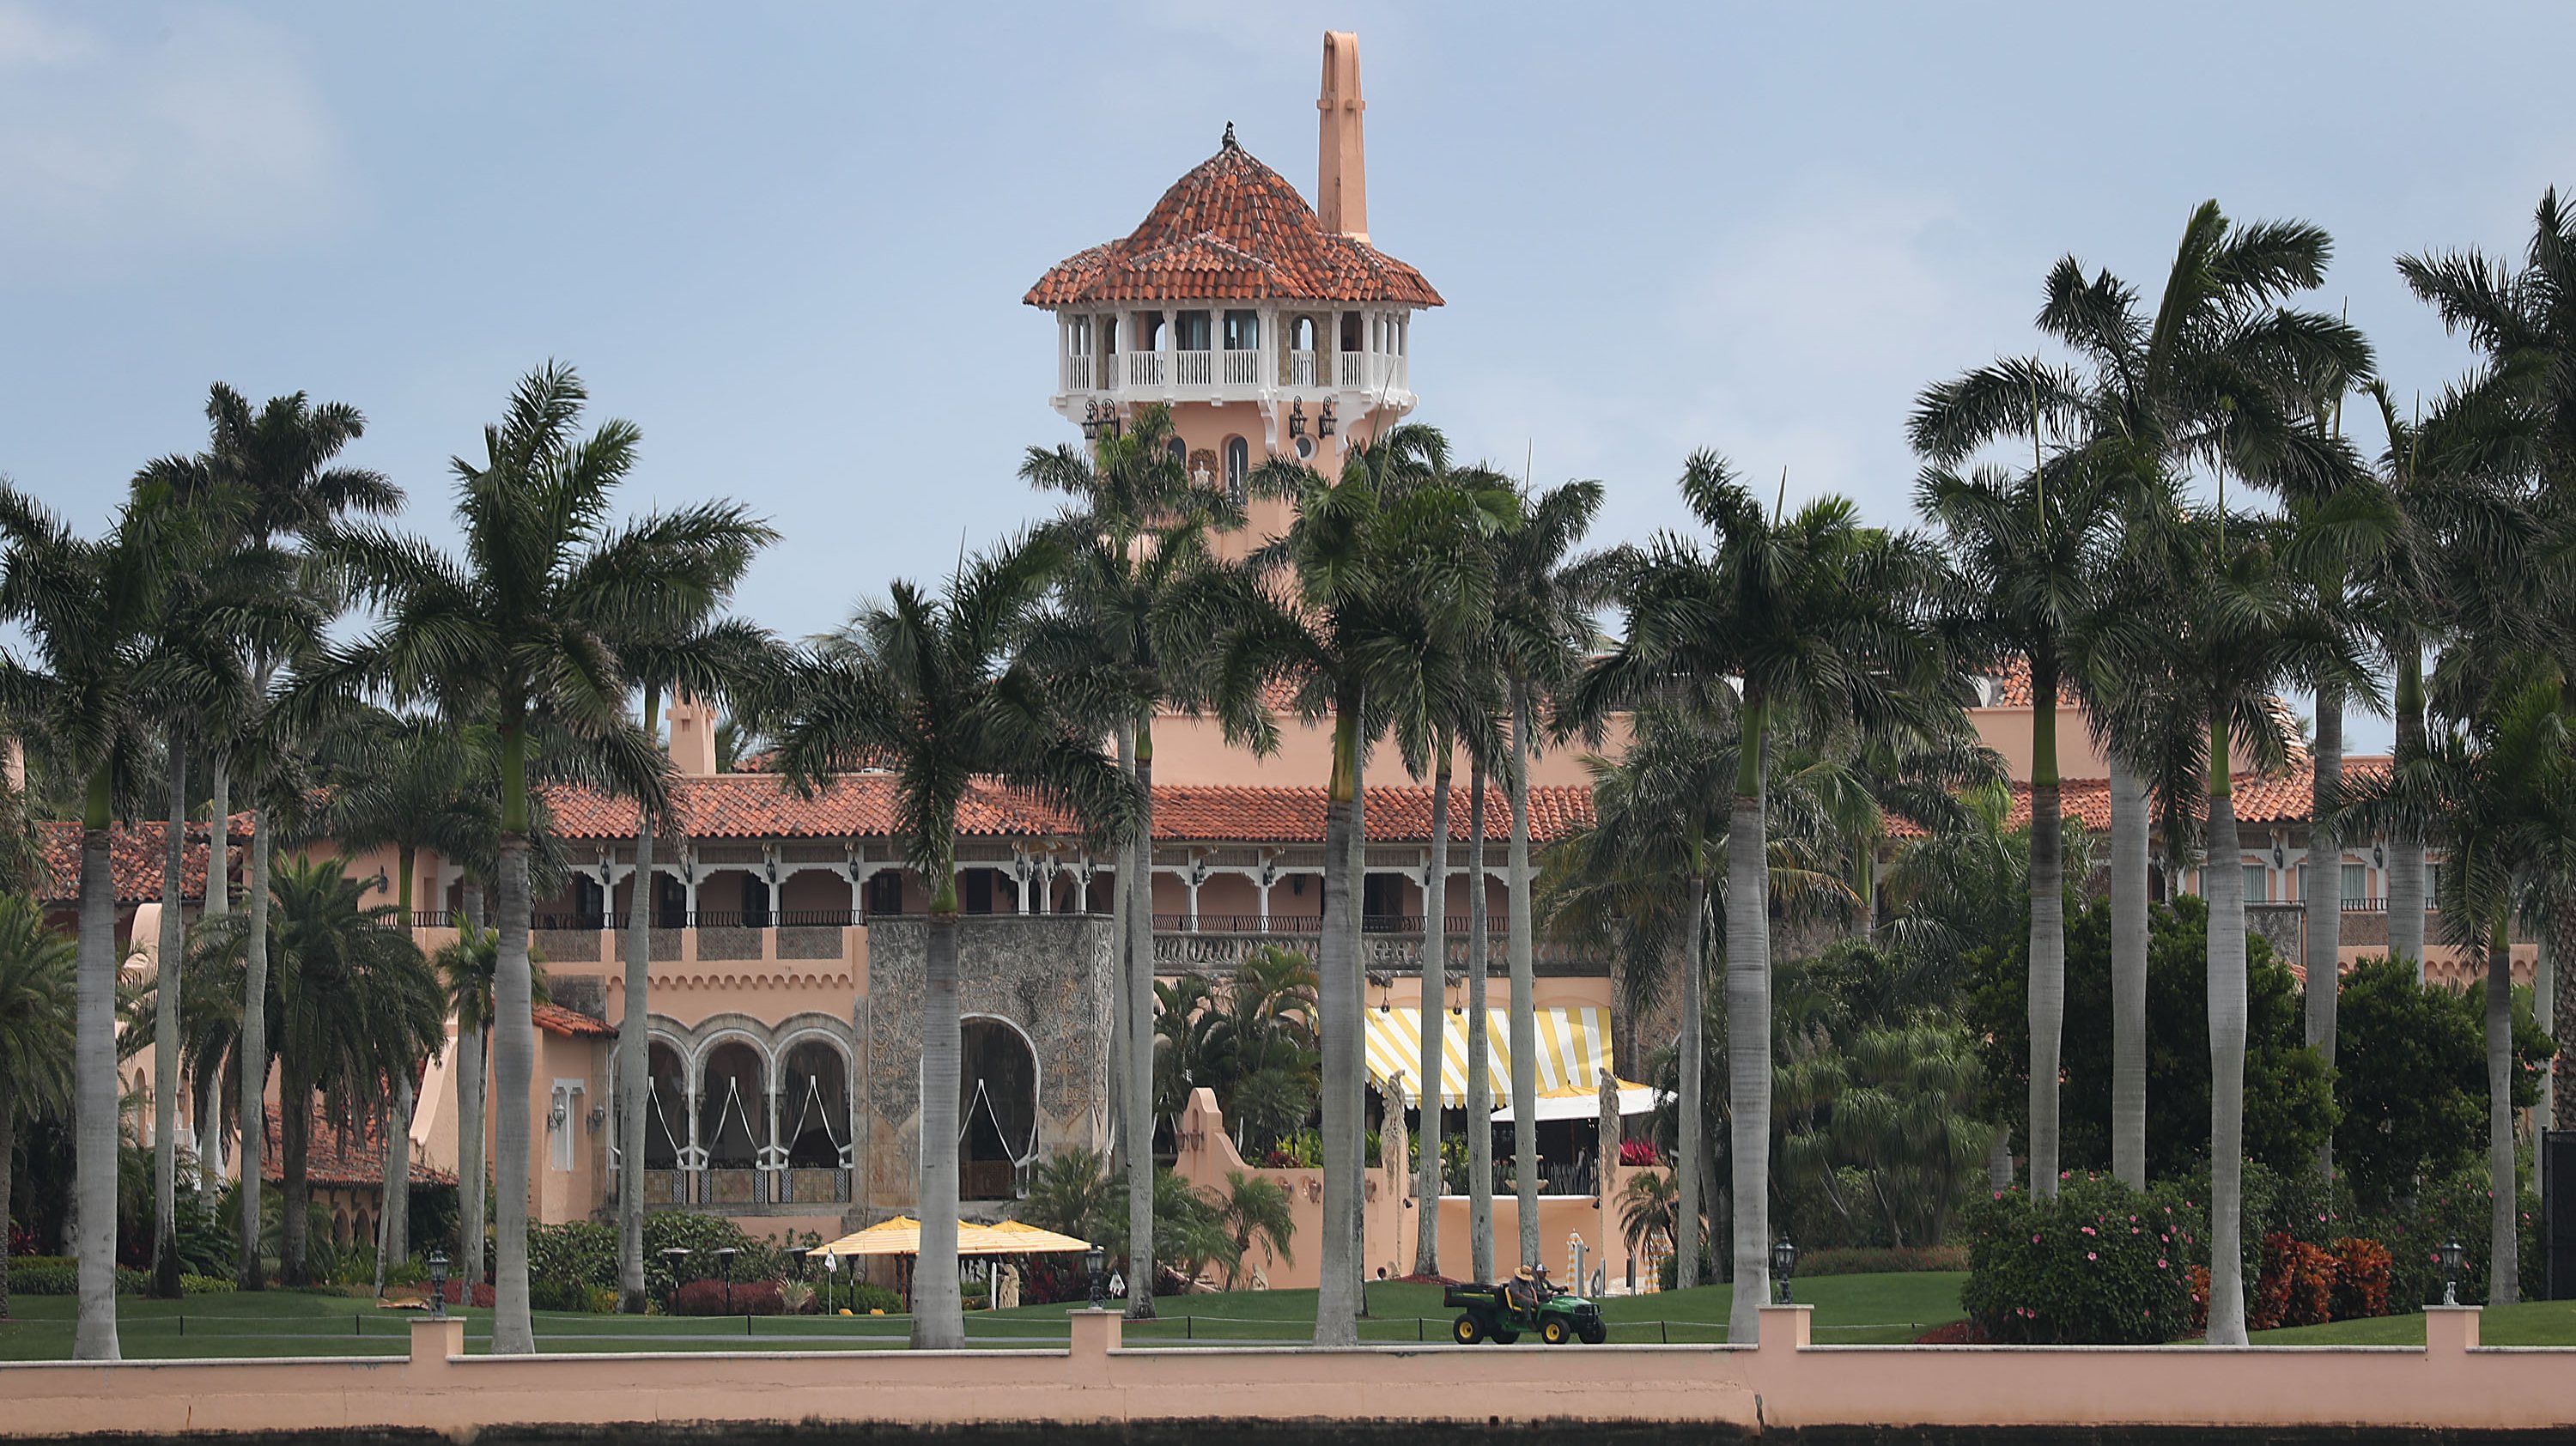 Chinese Woman With Malware Nearly Breaches Security At Trump&#039;s Mar-A-Lago Resort